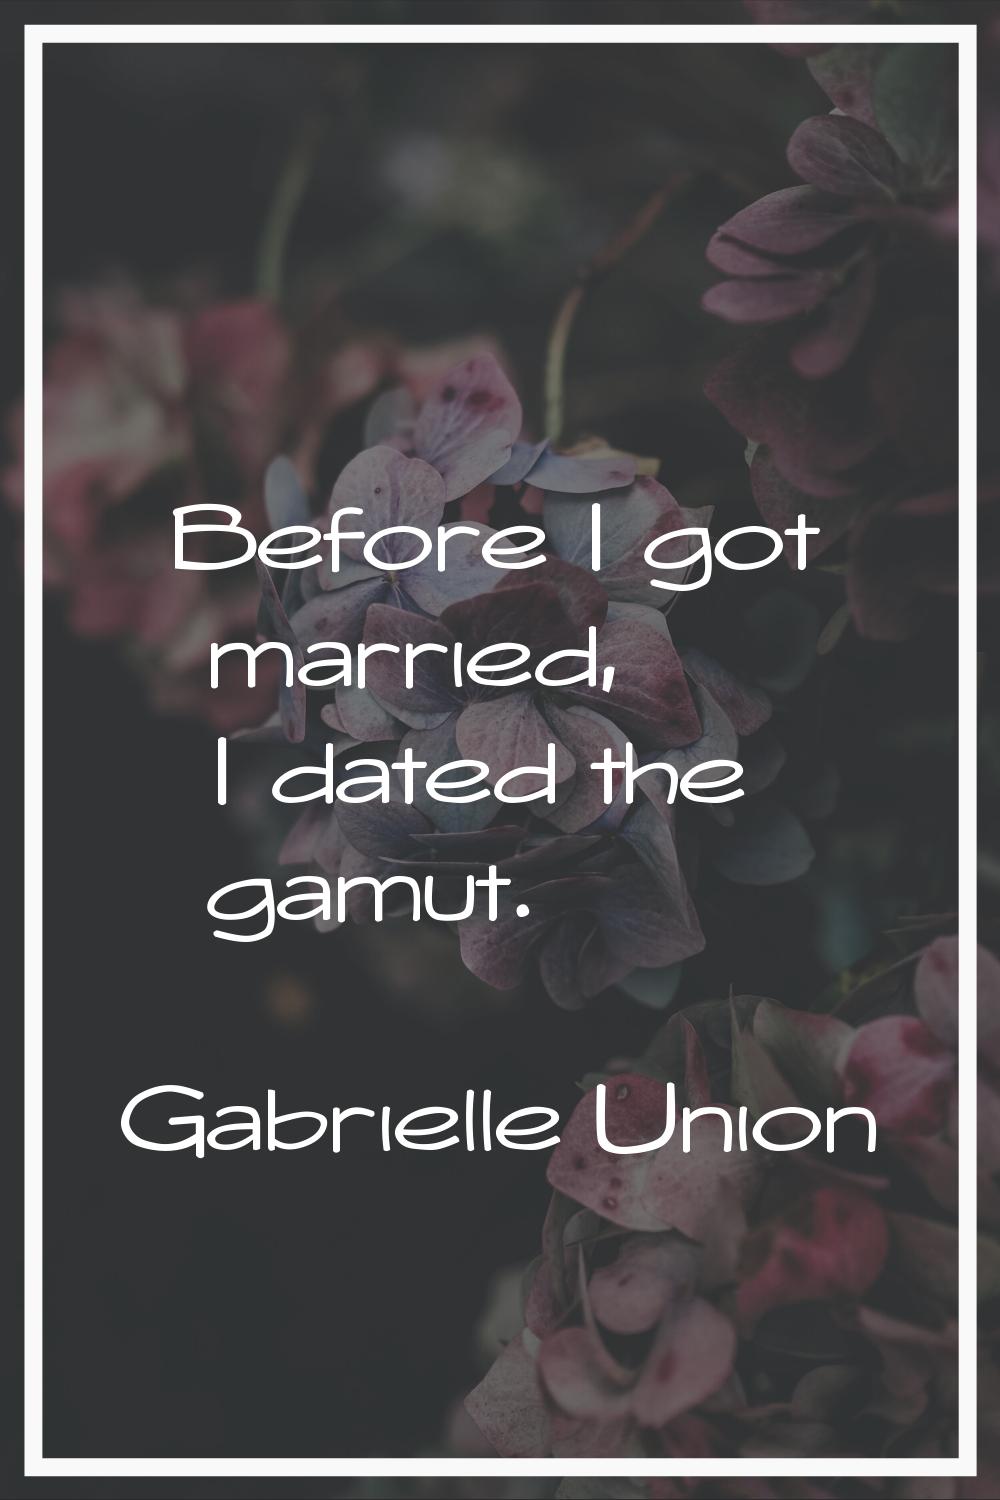 Before I got married, I dated the gamut.